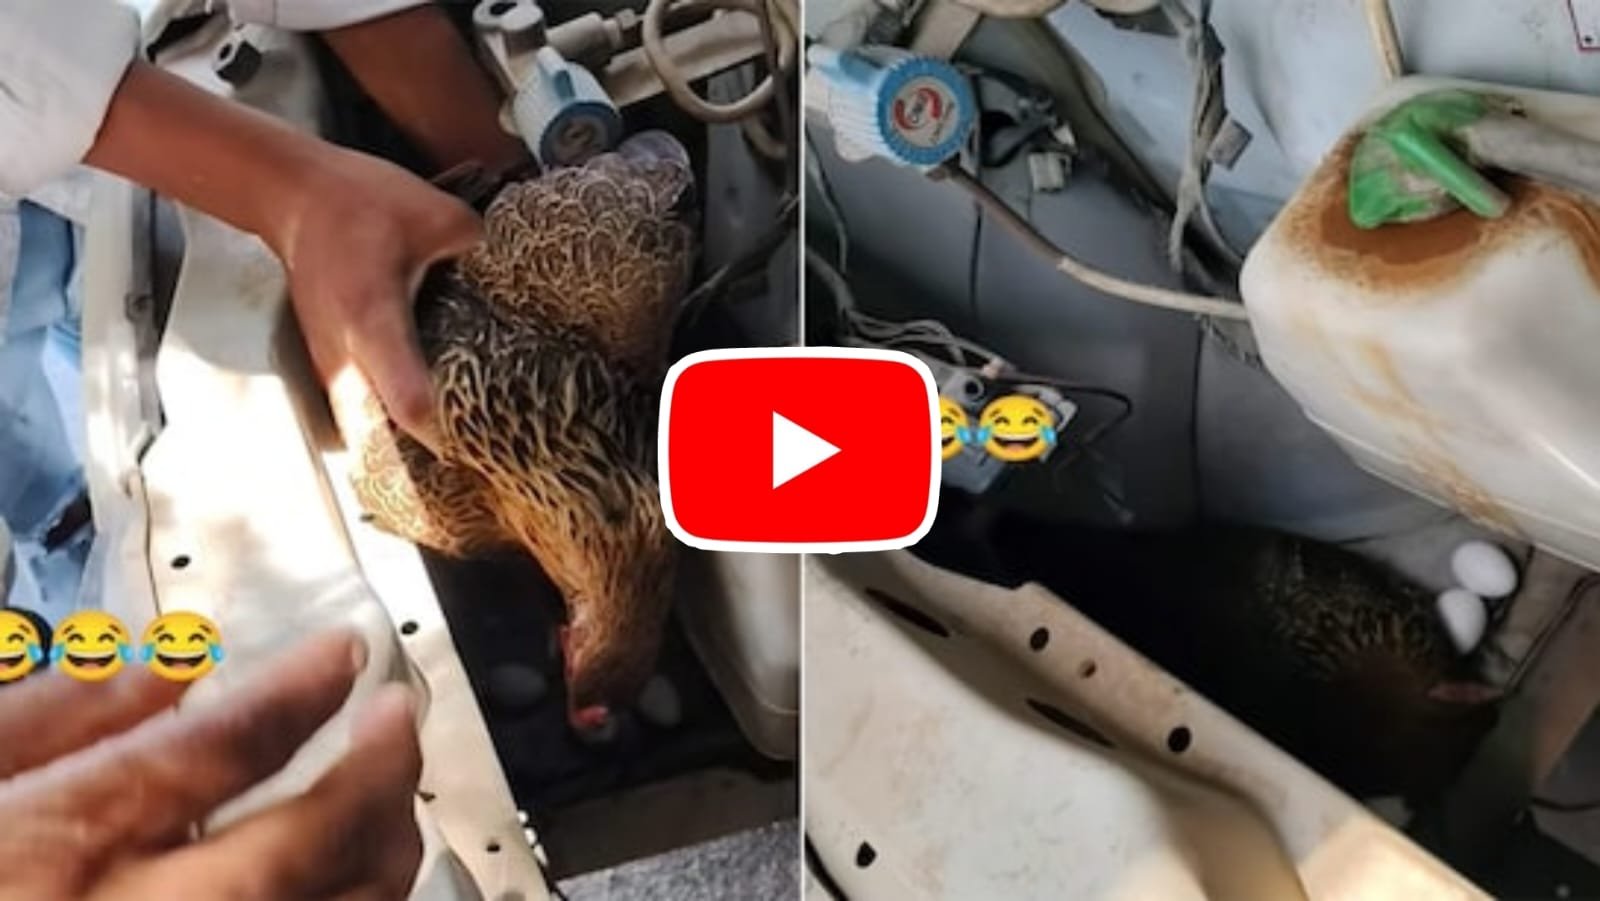 Funny Video: As soon as the bonnet of the car was opened, a hen came out from inside and laid eggs there.